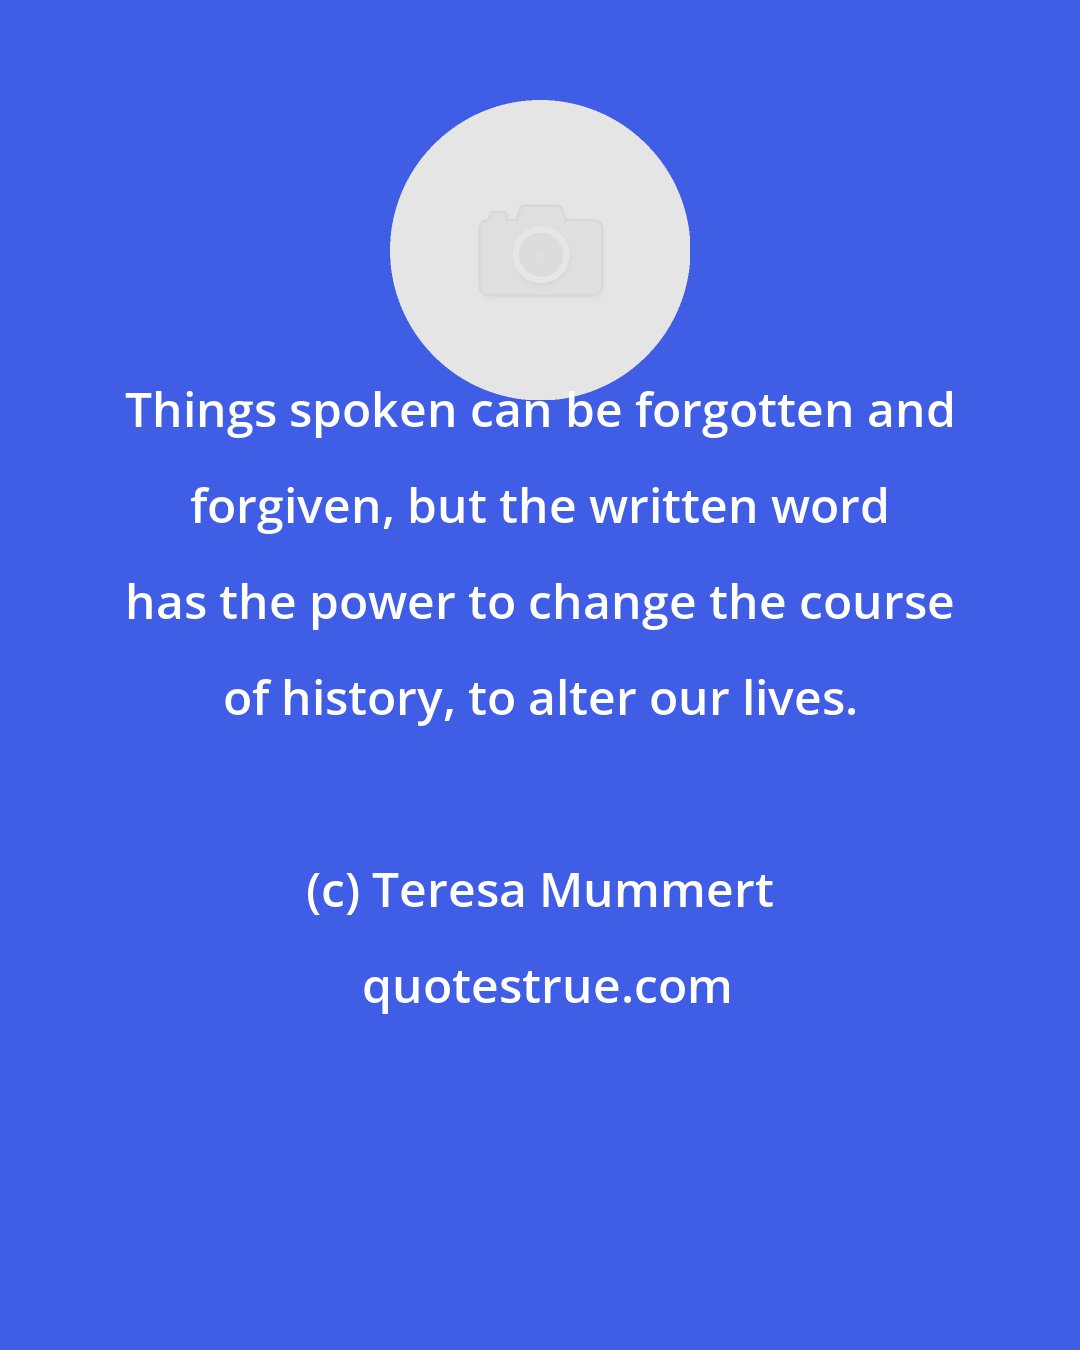 Teresa Mummert: Things spoken can be forgotten and forgiven, but the written word has the power to change the course of history, to alter our lives.